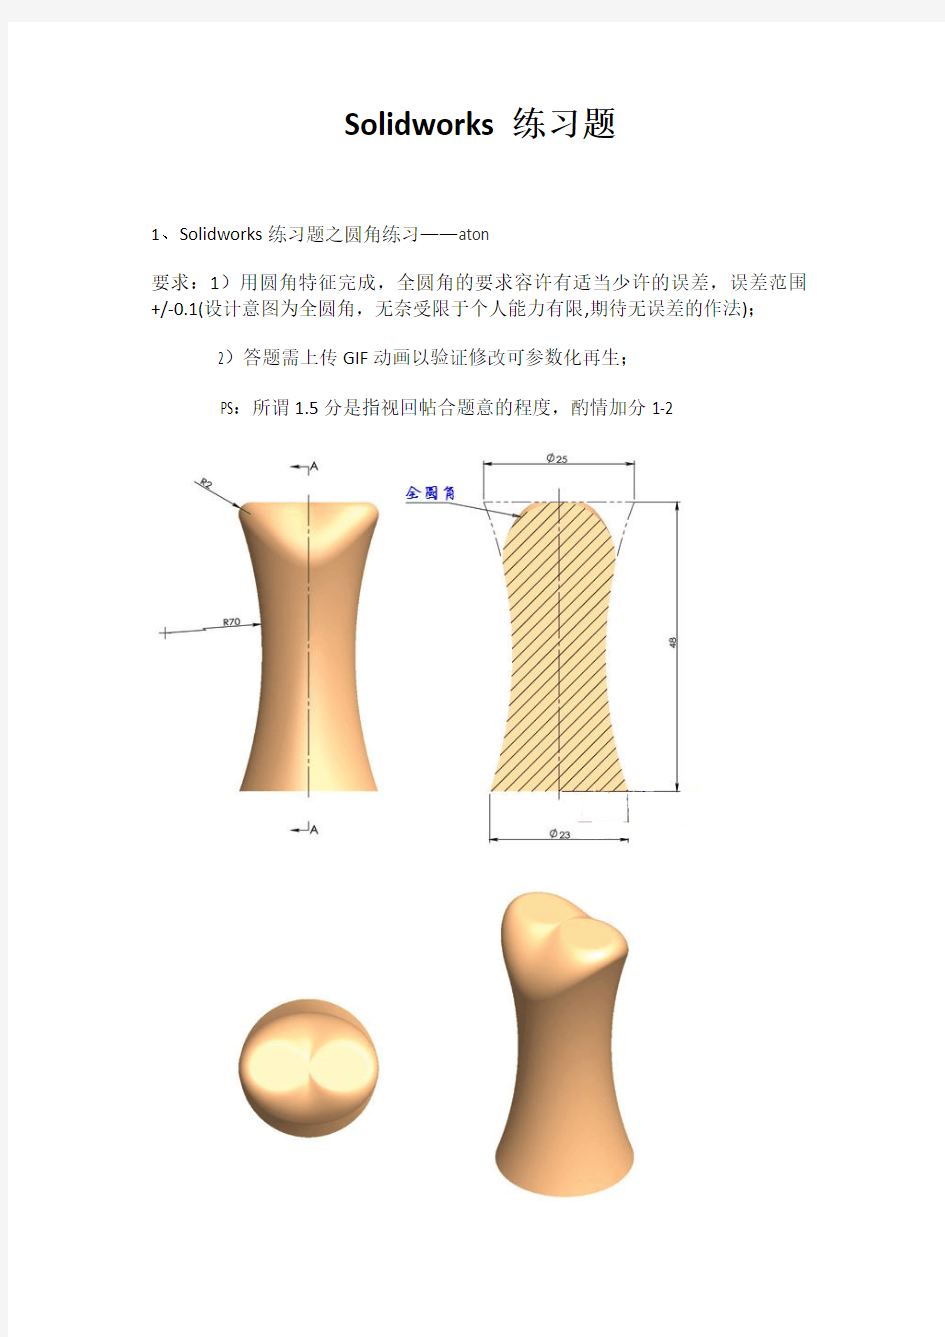 Solidworks练习题